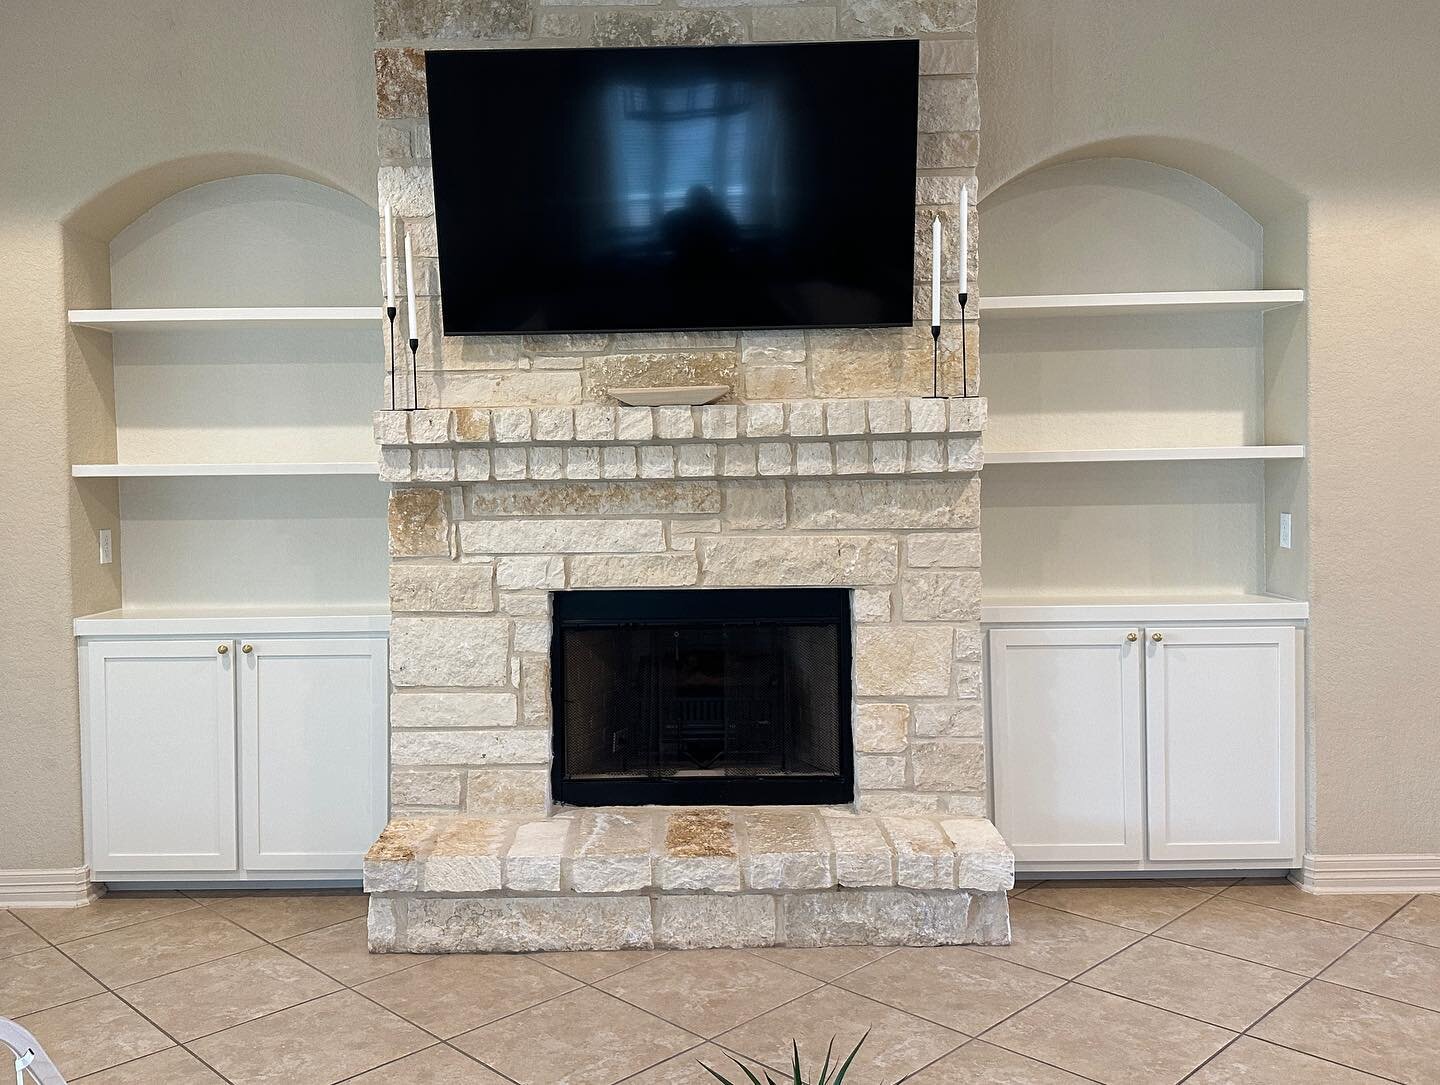 Throwback to a fireplace built-in with floating shelves. This was a fun build! What do you think?